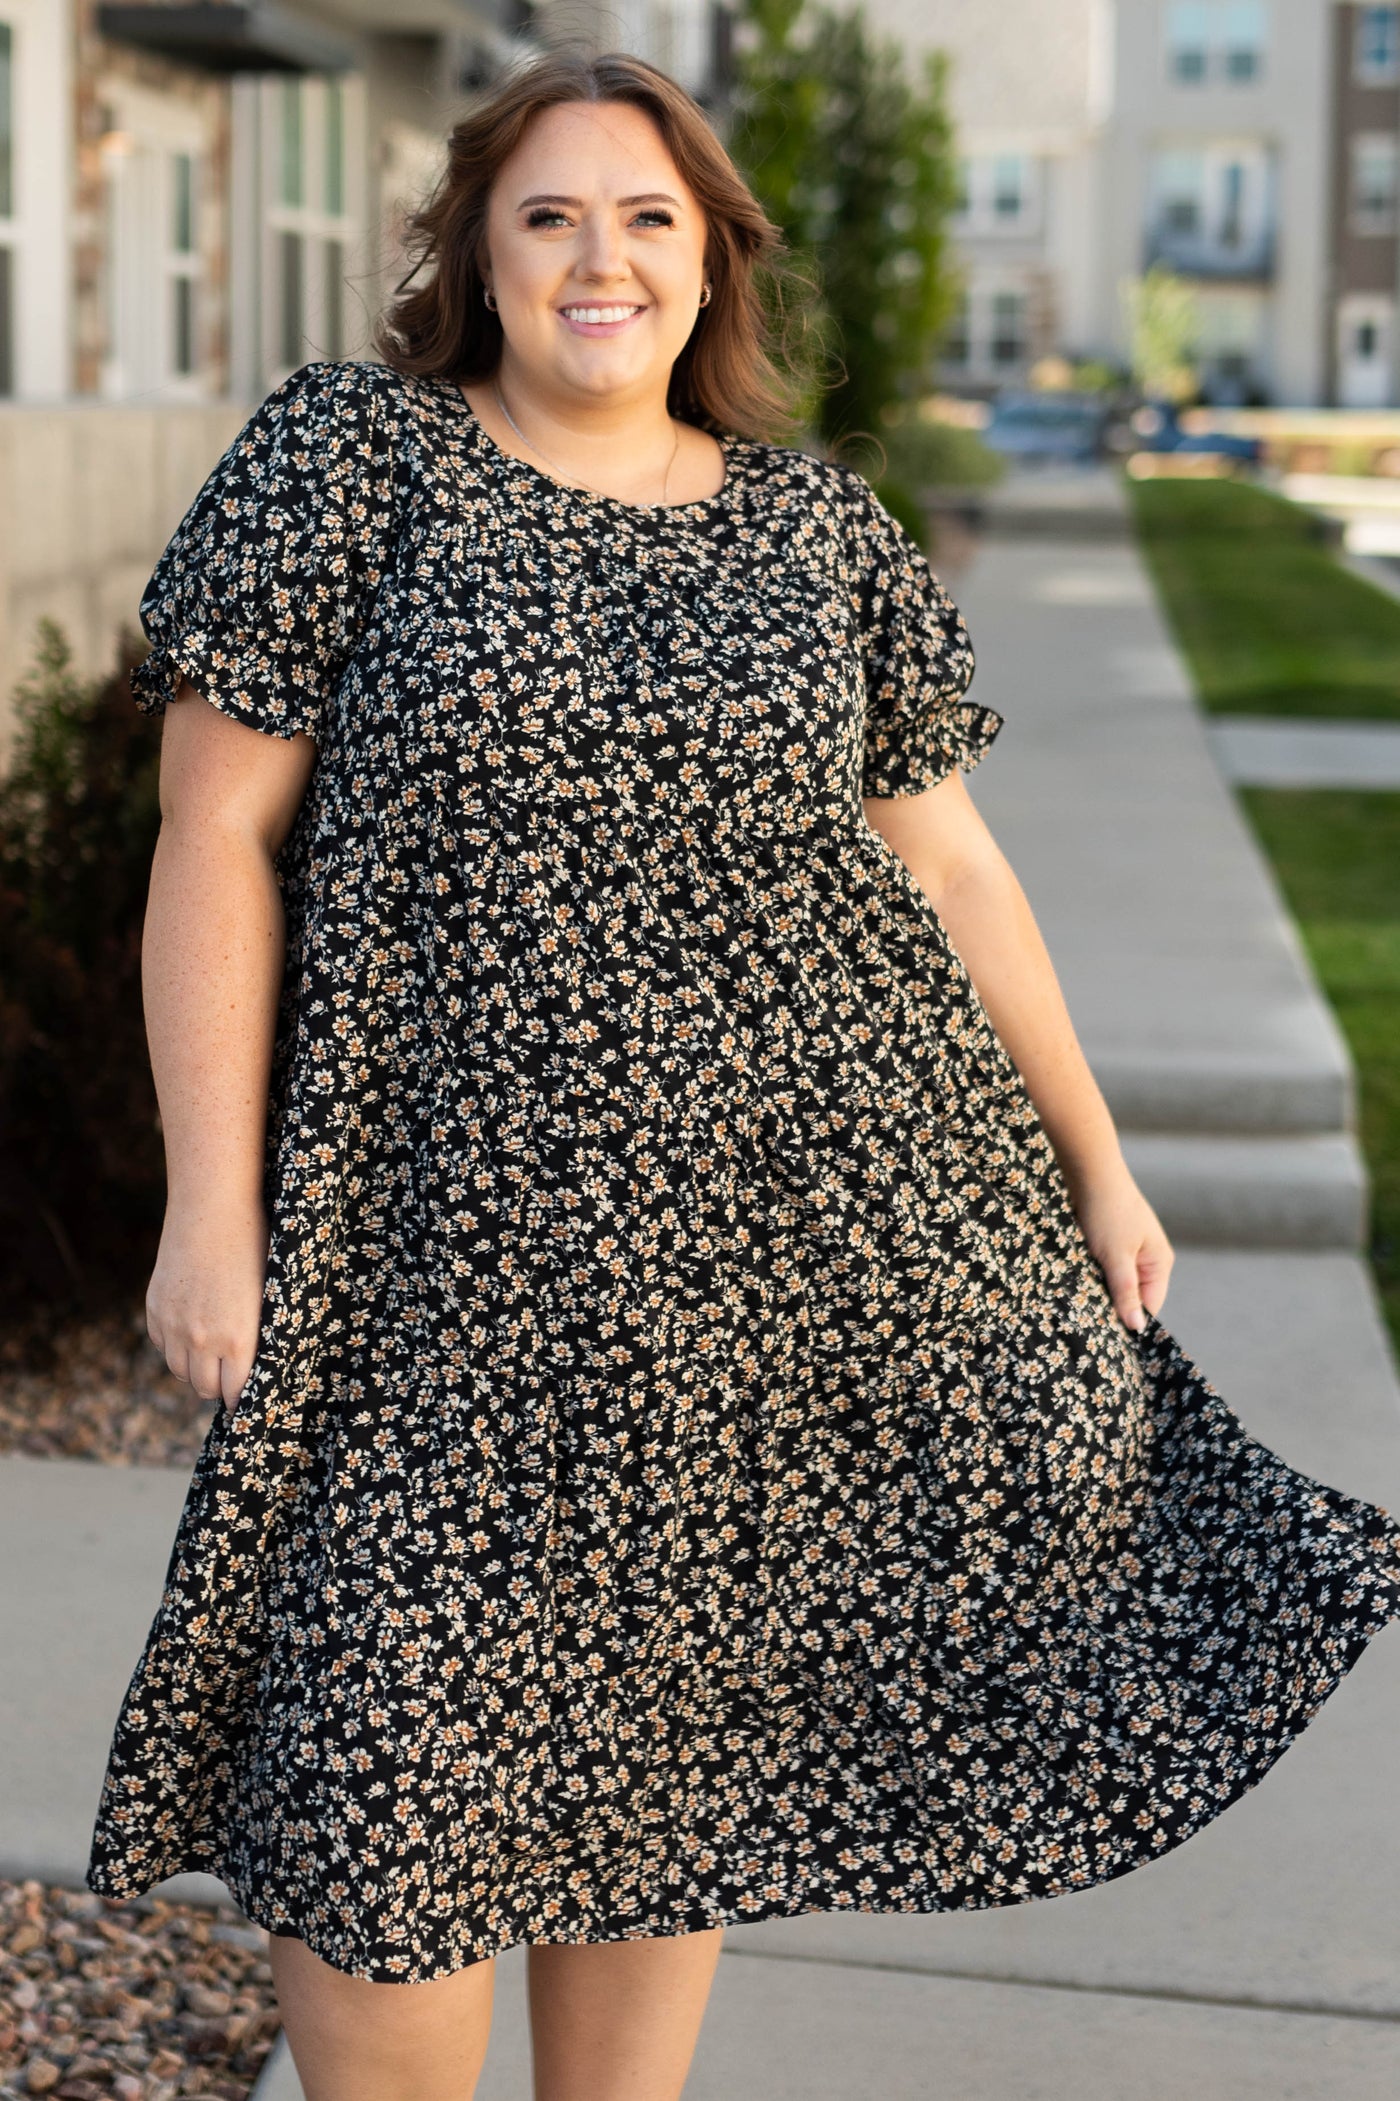 Short sleeve plus size black floral dress with pockets